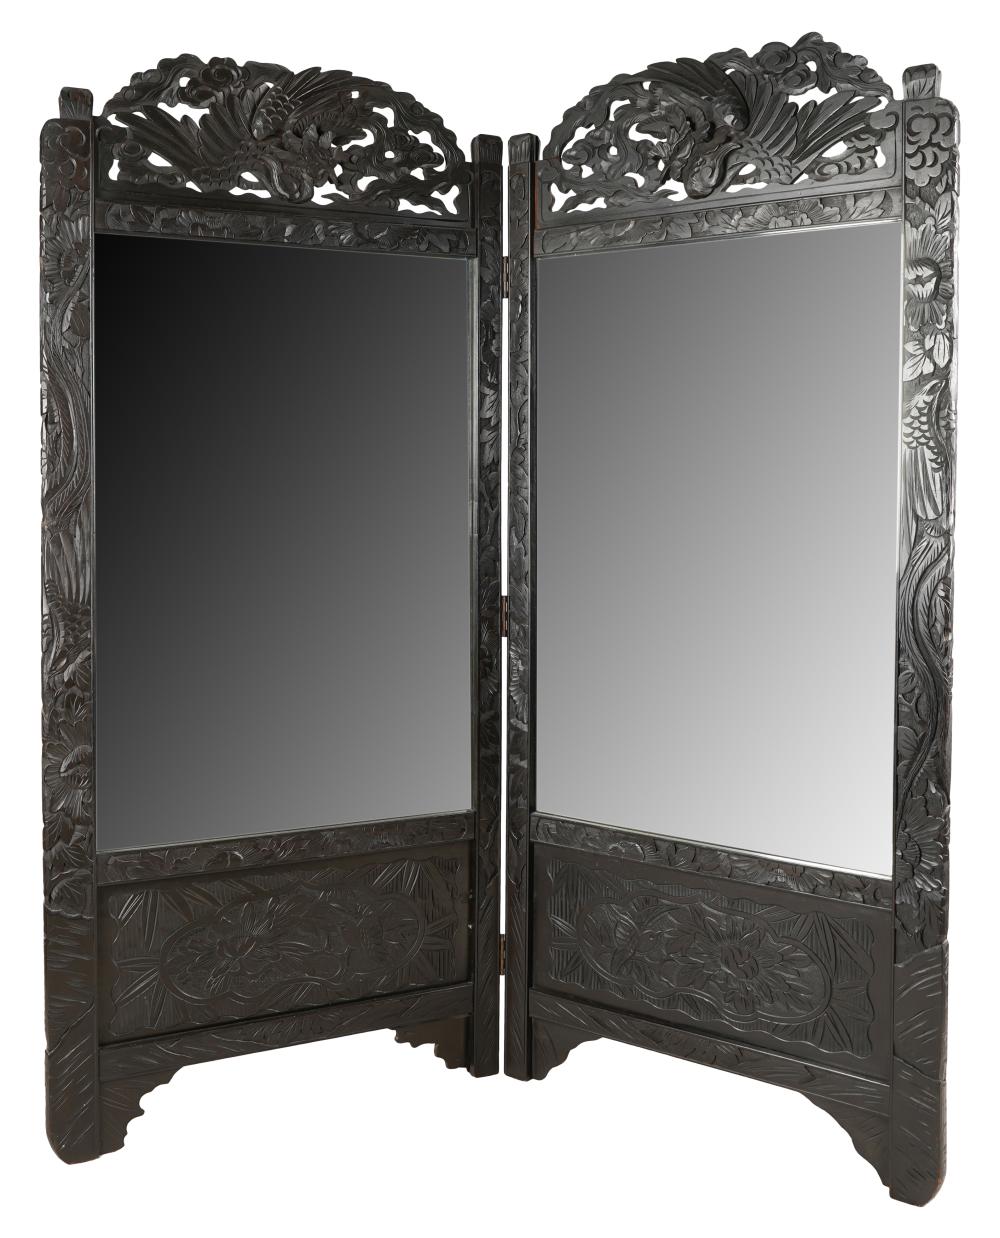 PAIR OF ASIAN CARVED WOOD MIRRORED